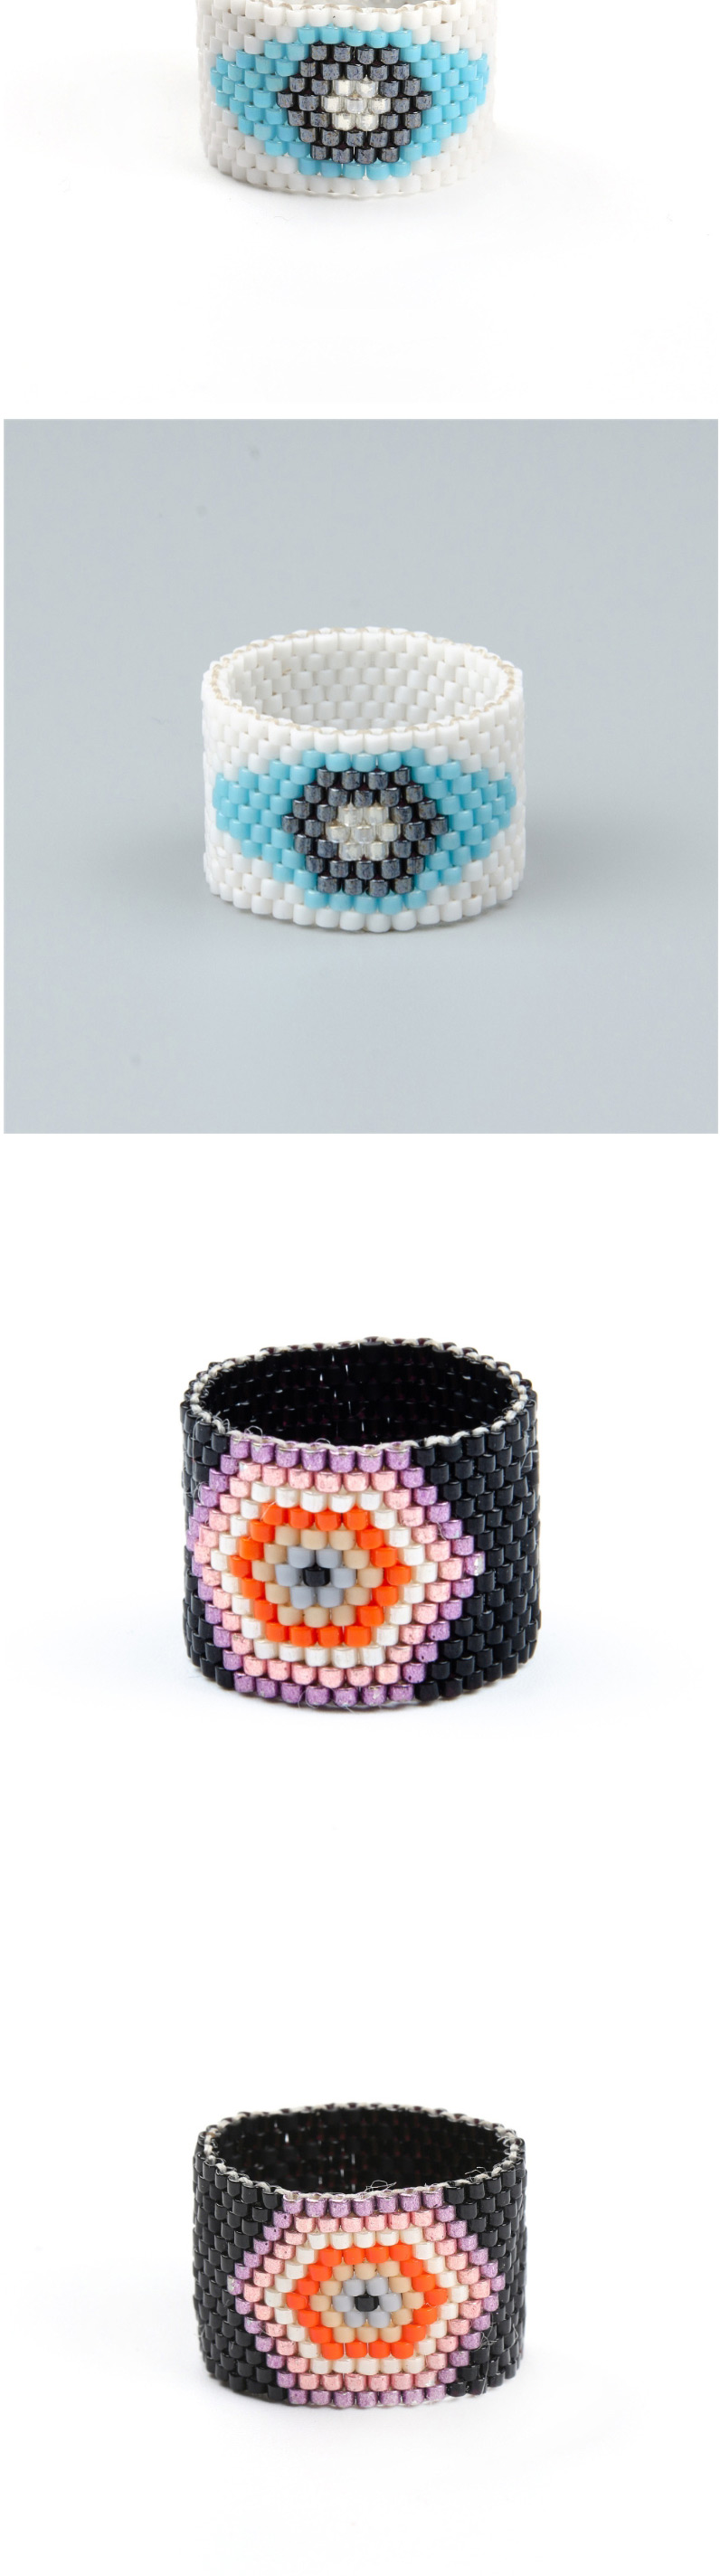 Fashion Color Mixing Beaded Woven Eye Ring,Fashion Rings